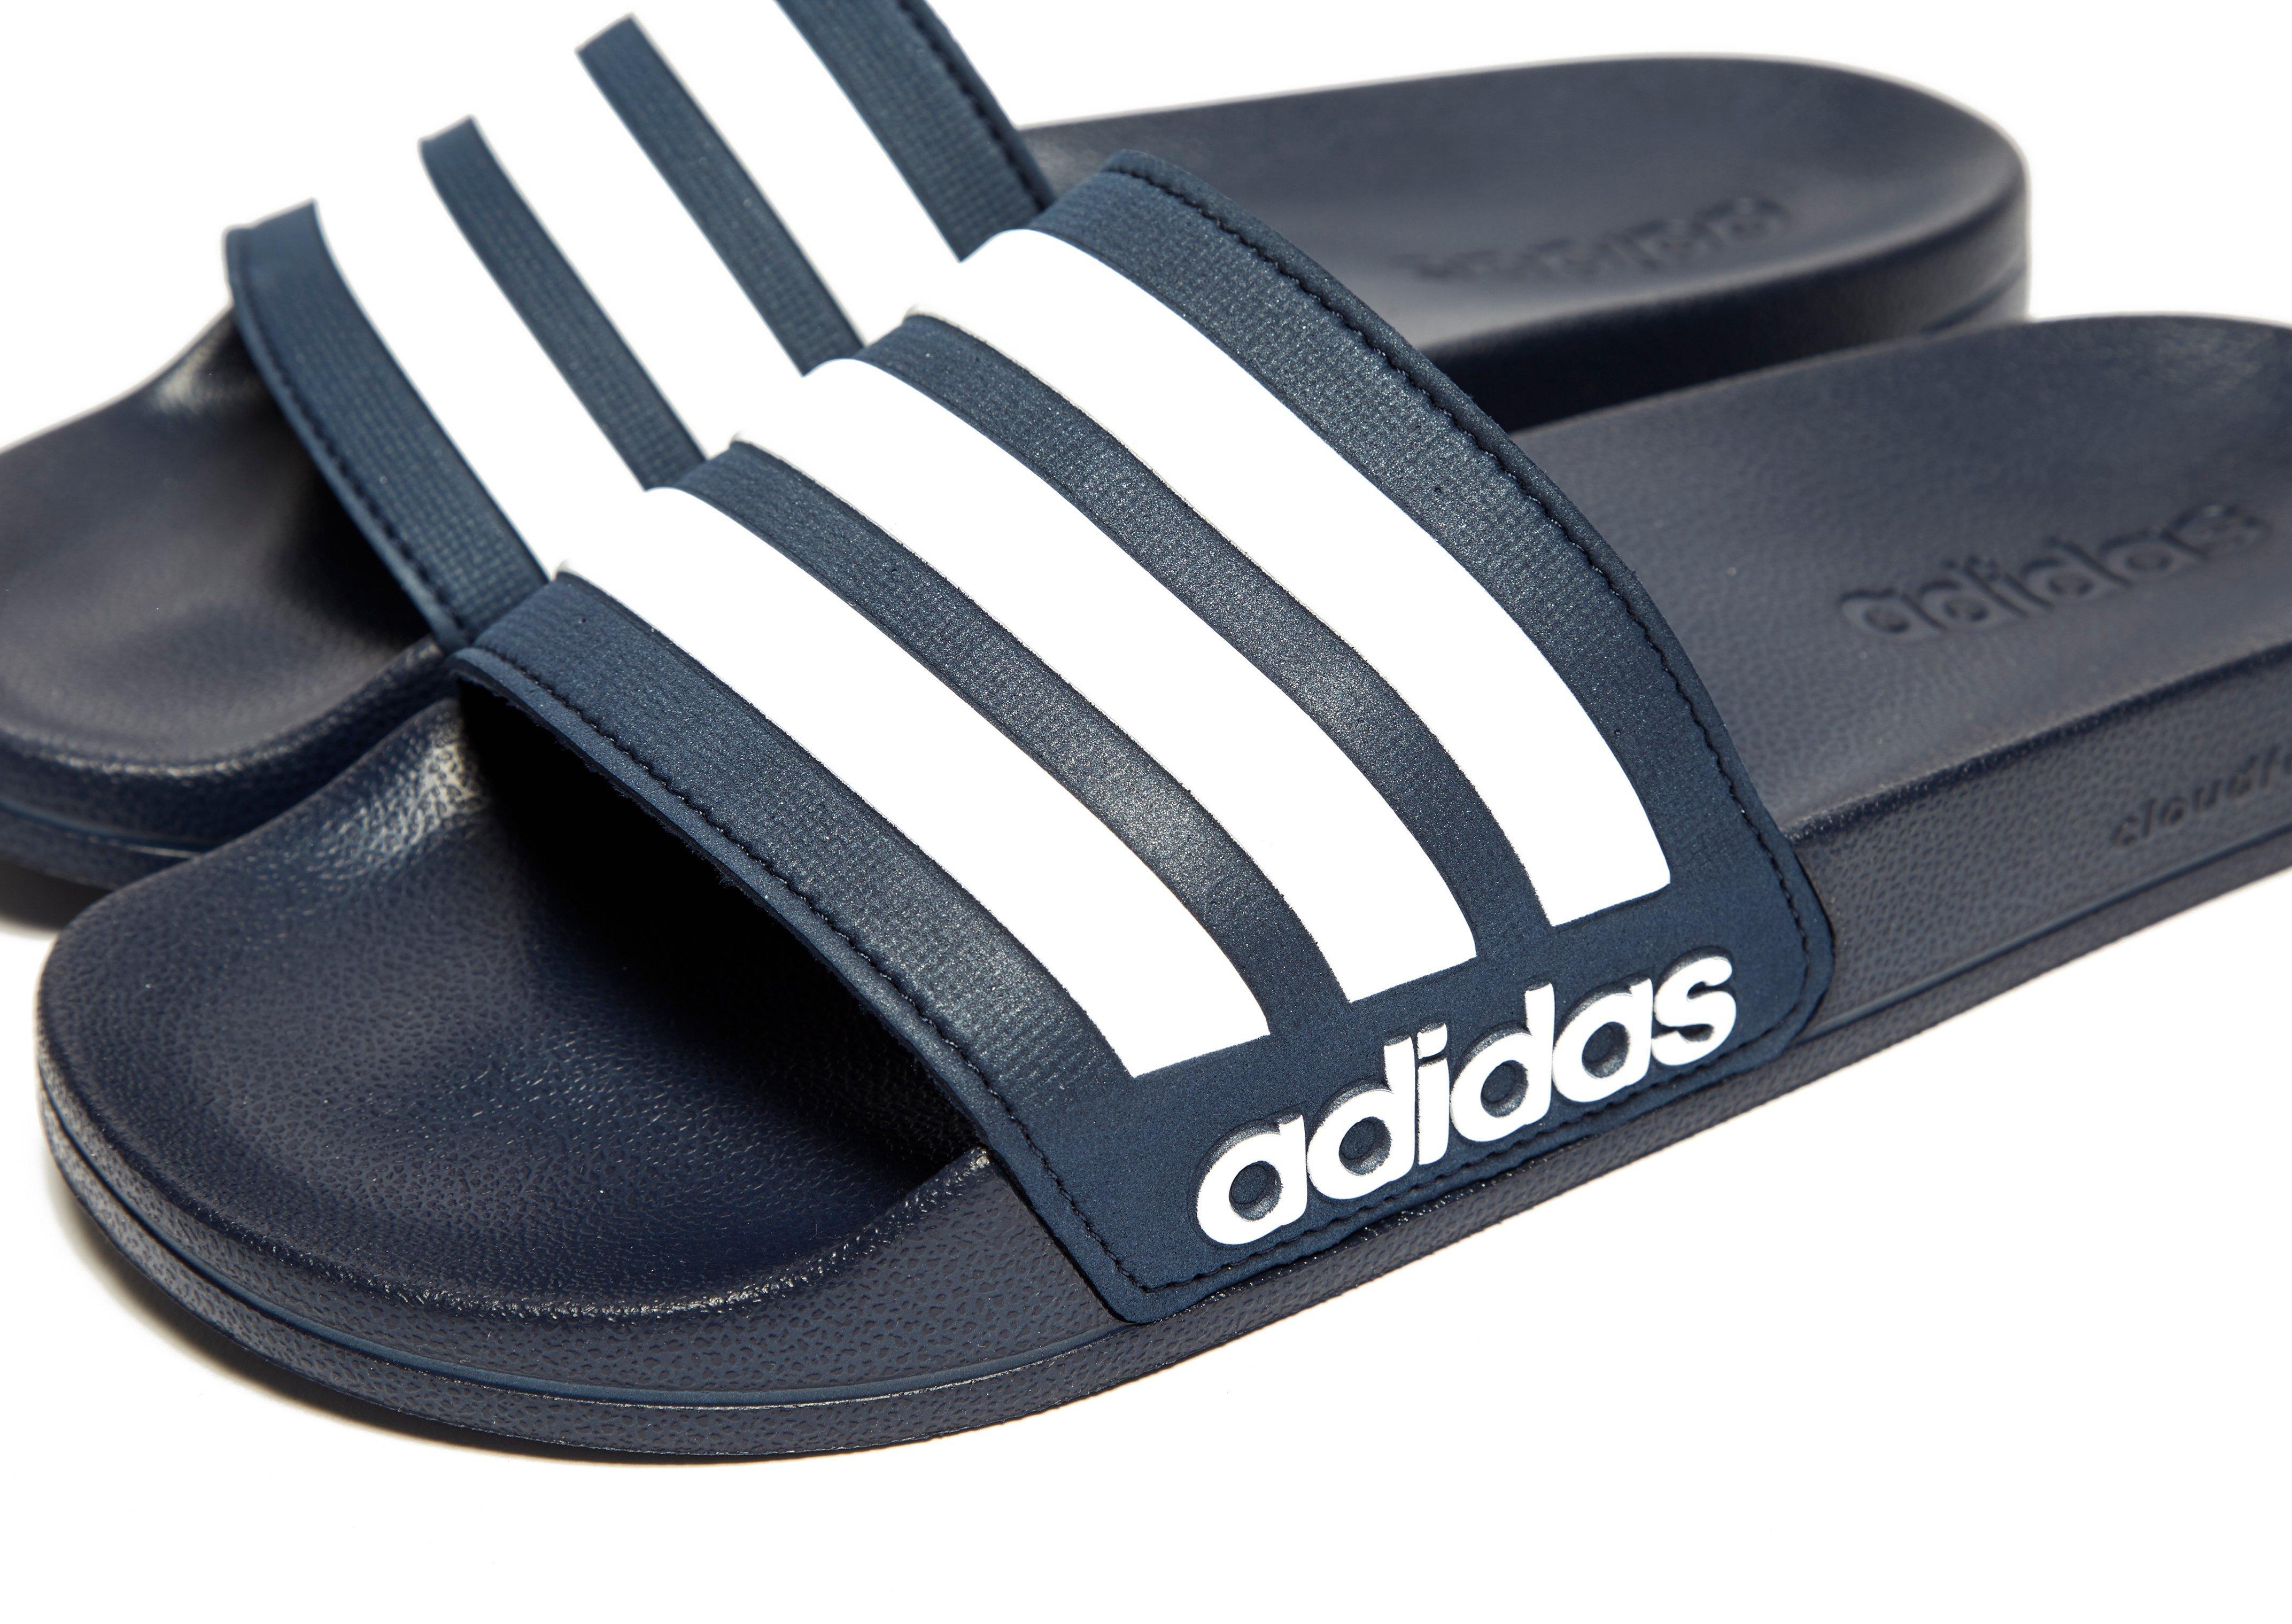  adidas  Synthetic Cloudfoam Adilette Slides  in Navy White 